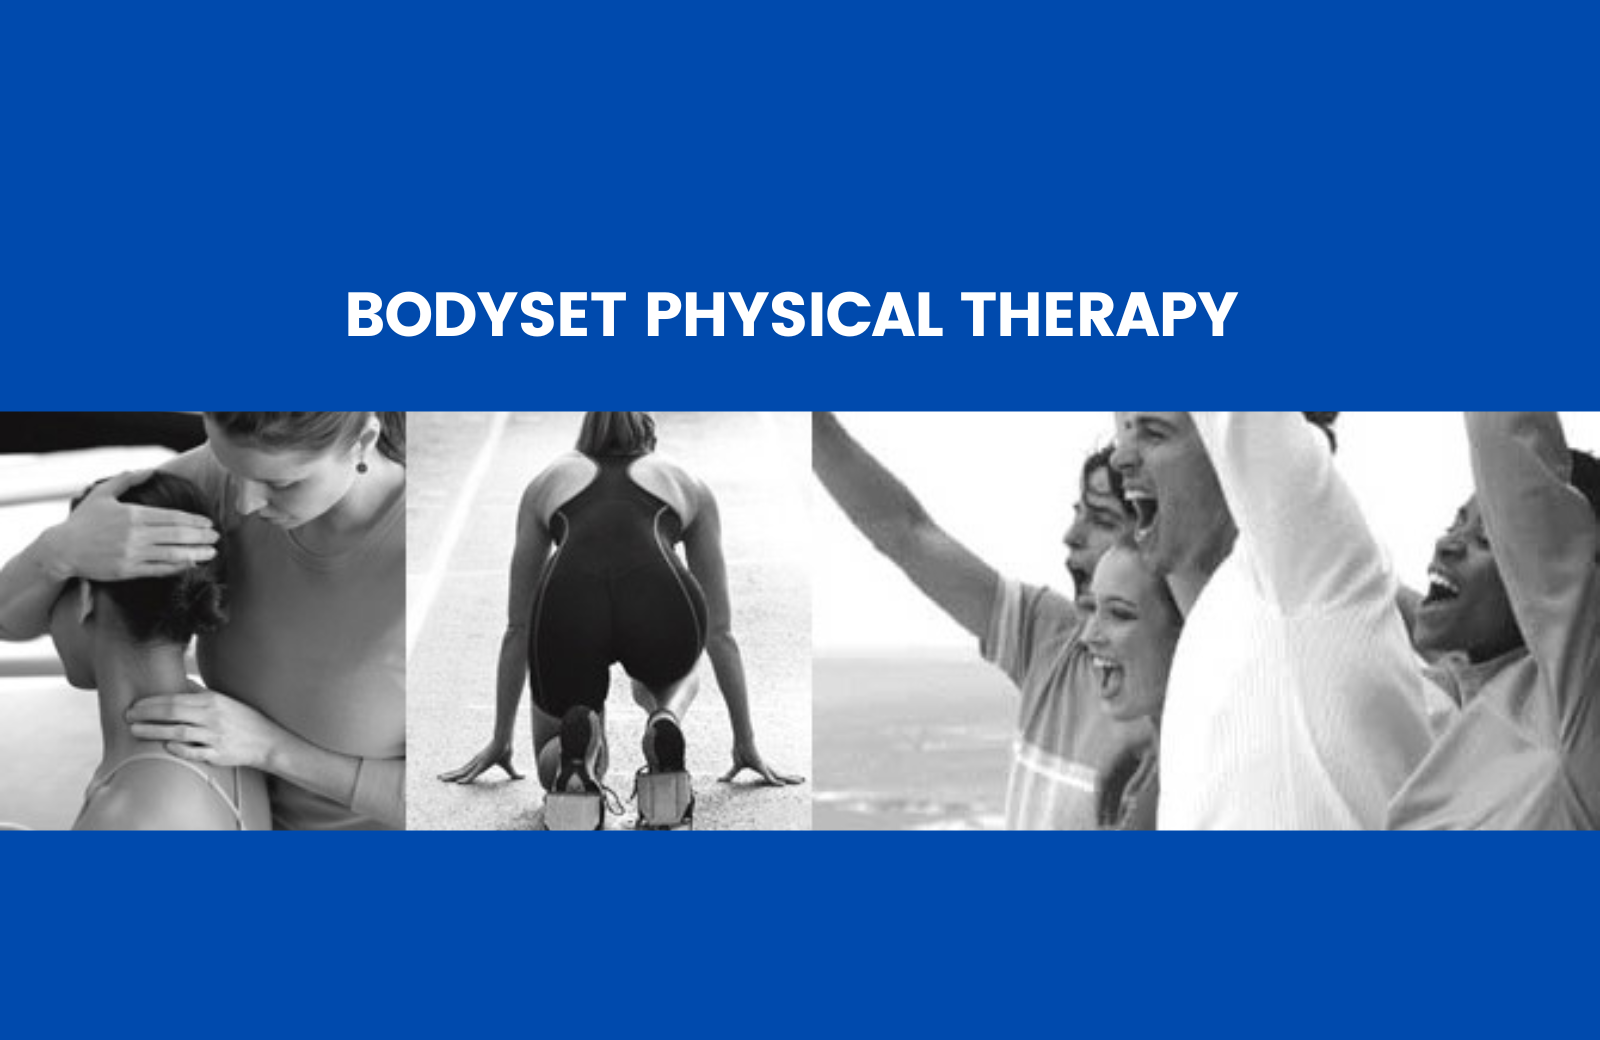 Bodyset Physical Therapy